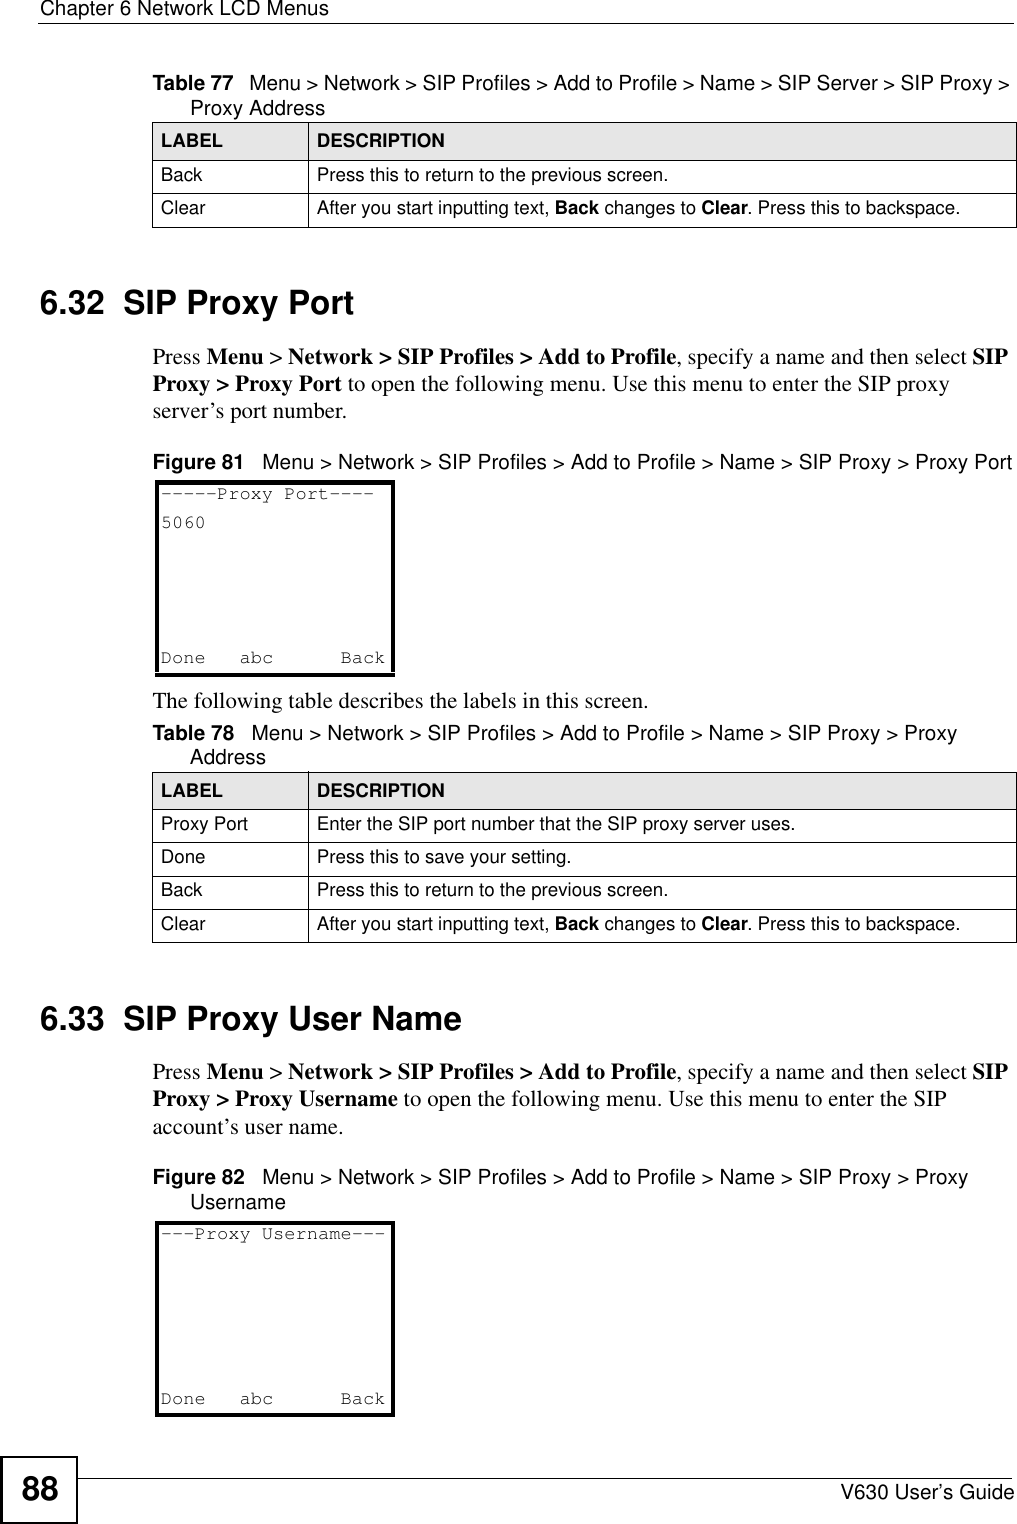 Chapter 6 Network LCD MenusV630 User’s Guide886.32  SIP Proxy PortPress Menu &gt; Network &gt; SIP Profiles &gt; Add to Profile, specify a name and then select SIP Proxy &gt; Proxy Port to open the following menu. Use this menu to enter the SIP proxy server’s port number.Figure 81   Menu &gt; Network &gt; SIP Profiles &gt; Add to Profile &gt; Name &gt; SIP Proxy &gt; Proxy PortThe following table describes the labels in this screen.6.33  SIP Proxy User NamePress Menu &gt; Network &gt; SIP Profiles &gt; Add to Profile, specify a name and then select SIP Proxy &gt; Proxy Username to open the following menu. Use this menu to enter the SIP account’s user name.Figure 82   Menu &gt; Network &gt; SIP Profiles &gt; Add to Profile &gt; Name &gt; SIP Proxy &gt; Proxy UsernameBack Press this to return to the previous screen. Clear After you start inputting text, Back changes to Clear. Press this to backspace.Table 77   Menu &gt; Network &gt; SIP Profiles &gt; Add to Profile &gt; Name &gt; SIP Server &gt; SIP Proxy &gt; Proxy AddressLABEL DESCRIPTIONTable 78   Menu &gt; Network &gt; SIP Profiles &gt; Add to Profile &gt; Name &gt; SIP Proxy &gt; Proxy AddressLABEL DESCRIPTIONProxy Port Enter the SIP port number that the SIP proxy server uses. Done Press this to save your setting. Back Press this to return to the previous screen. Clear After you start inputting text, Back changes to Clear. Press this to backspace.-----Proxy Port----5060Done abc   Back---Proxy Username---Done abc   Back